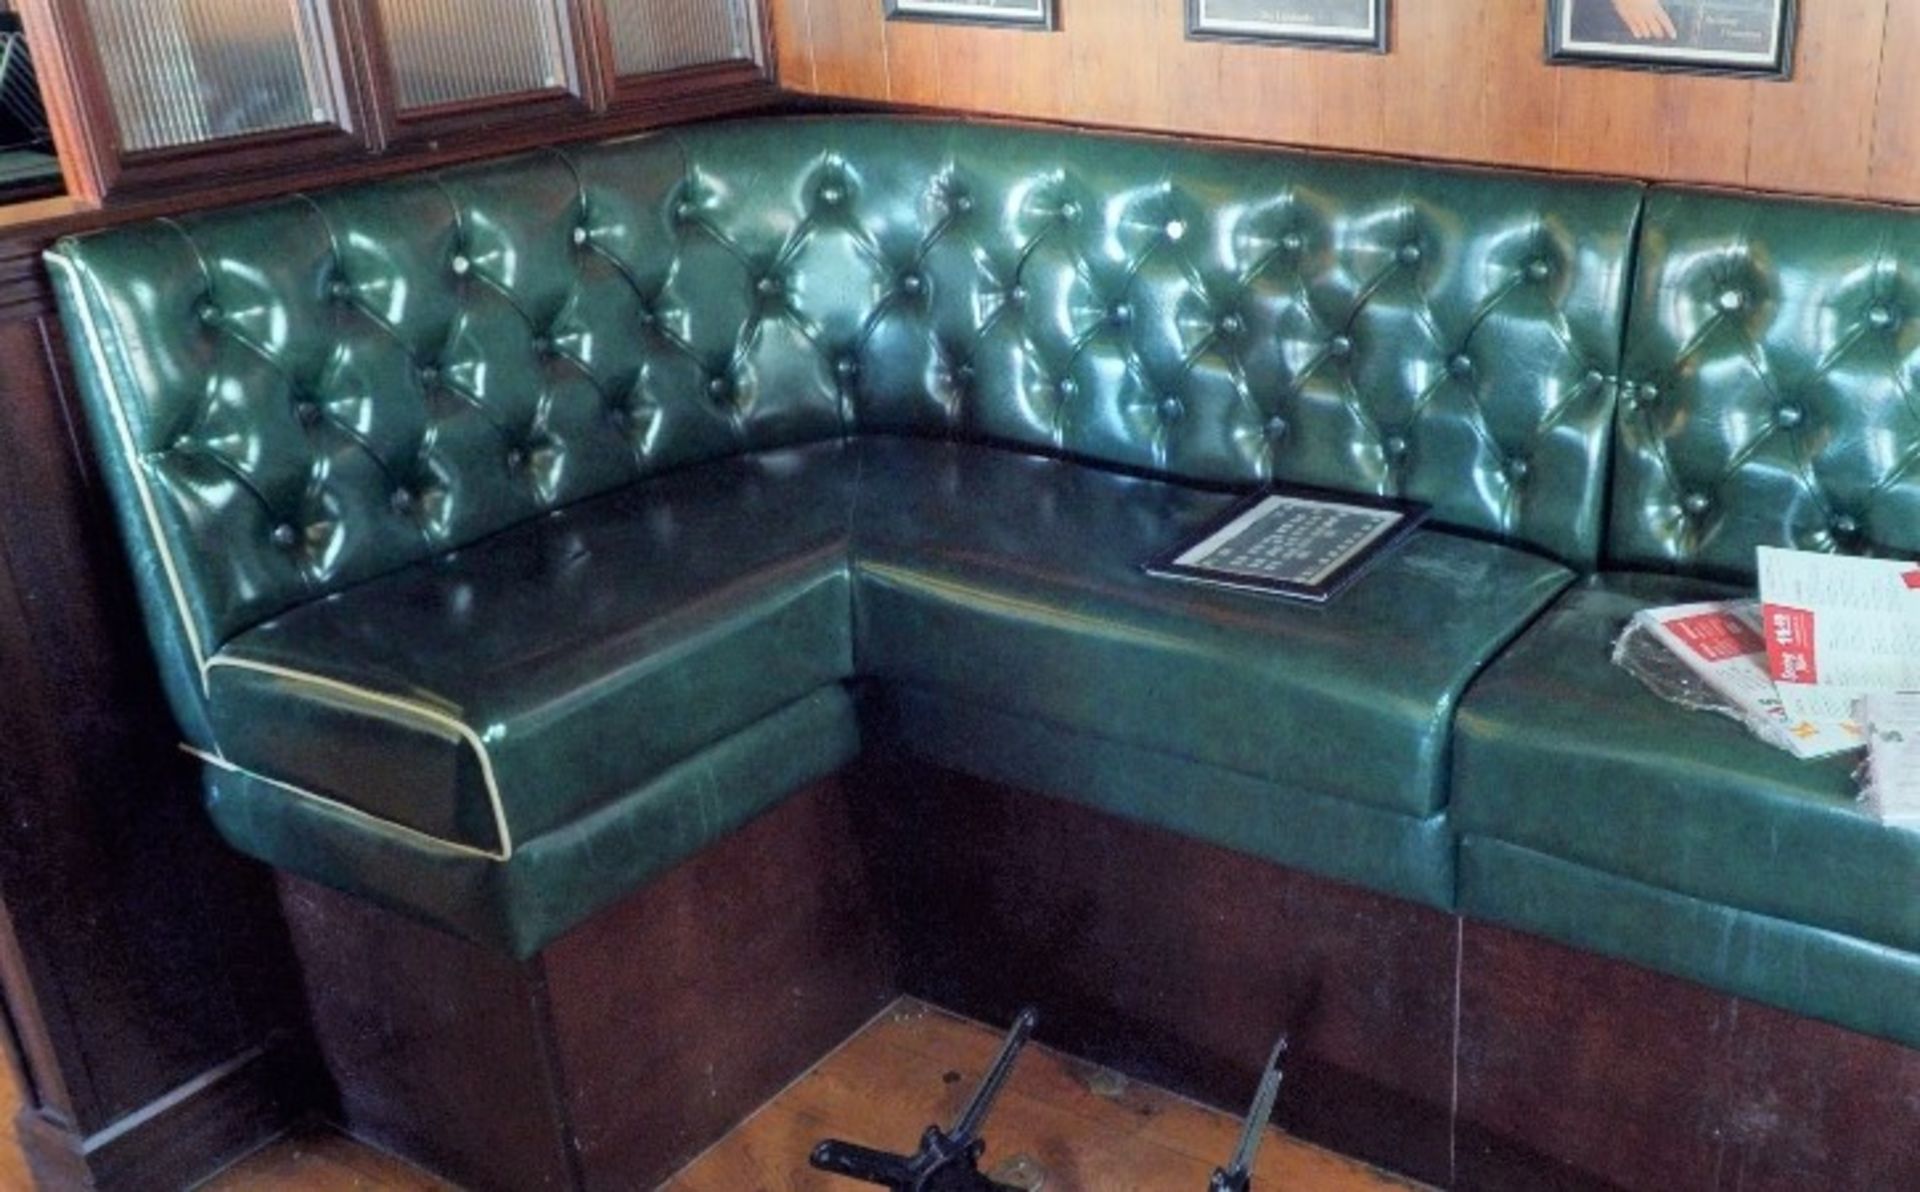 1 x Restaurant Tall Seating Booth - Retro 1950's American Diner Style With Regency Green Upholstery, - Image 5 of 5